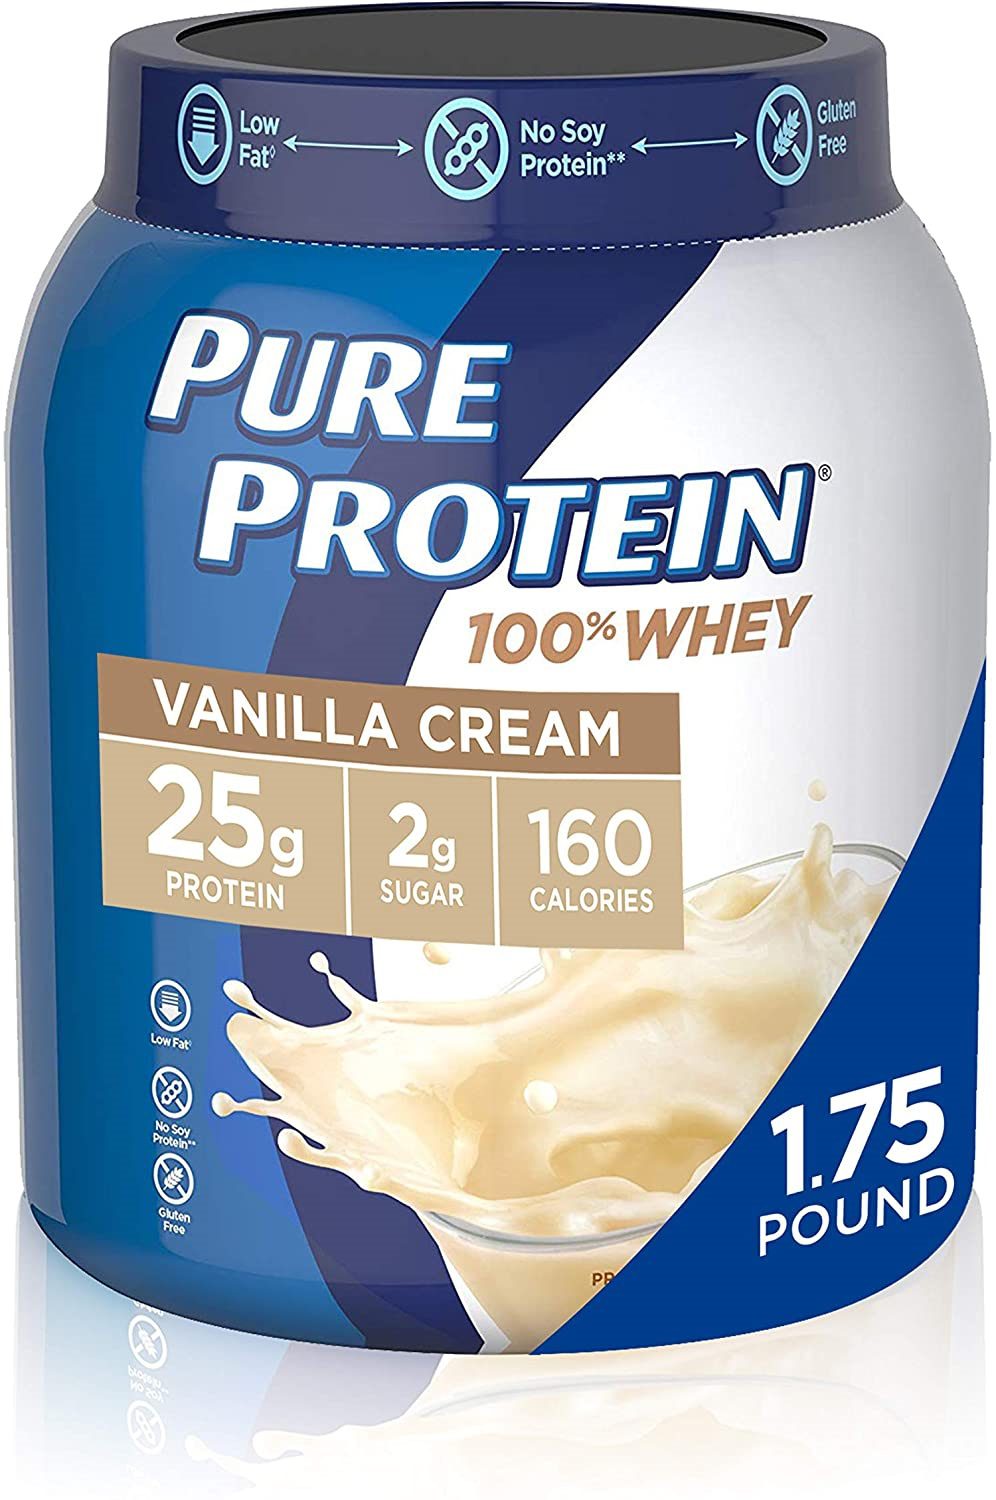 Whey Protein Powder by Pure Protein